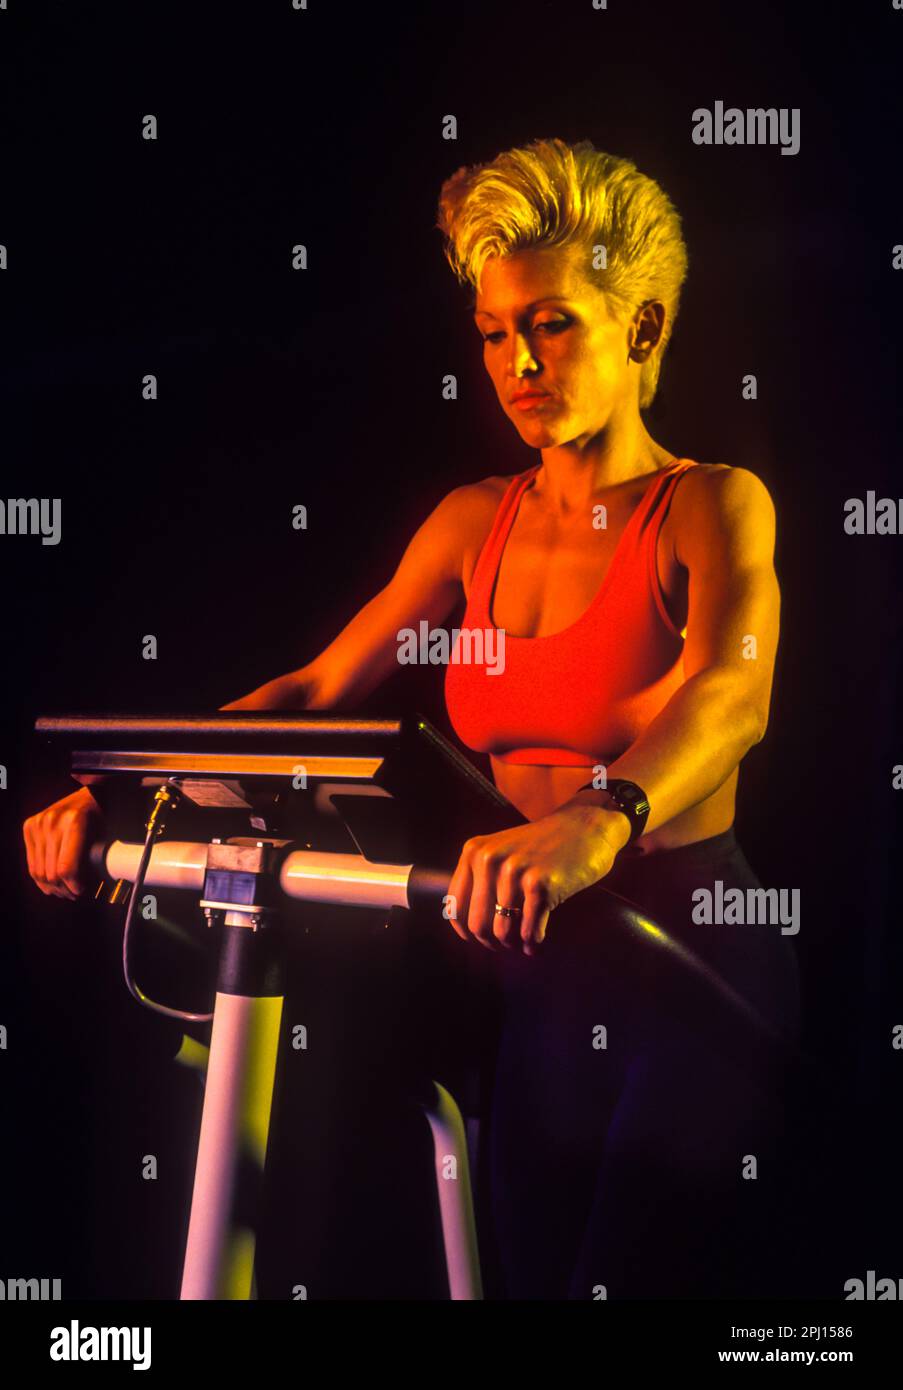 YOUNG WOMAN ON STAIRMASTER EXERCISE MACHINE Stock Photo